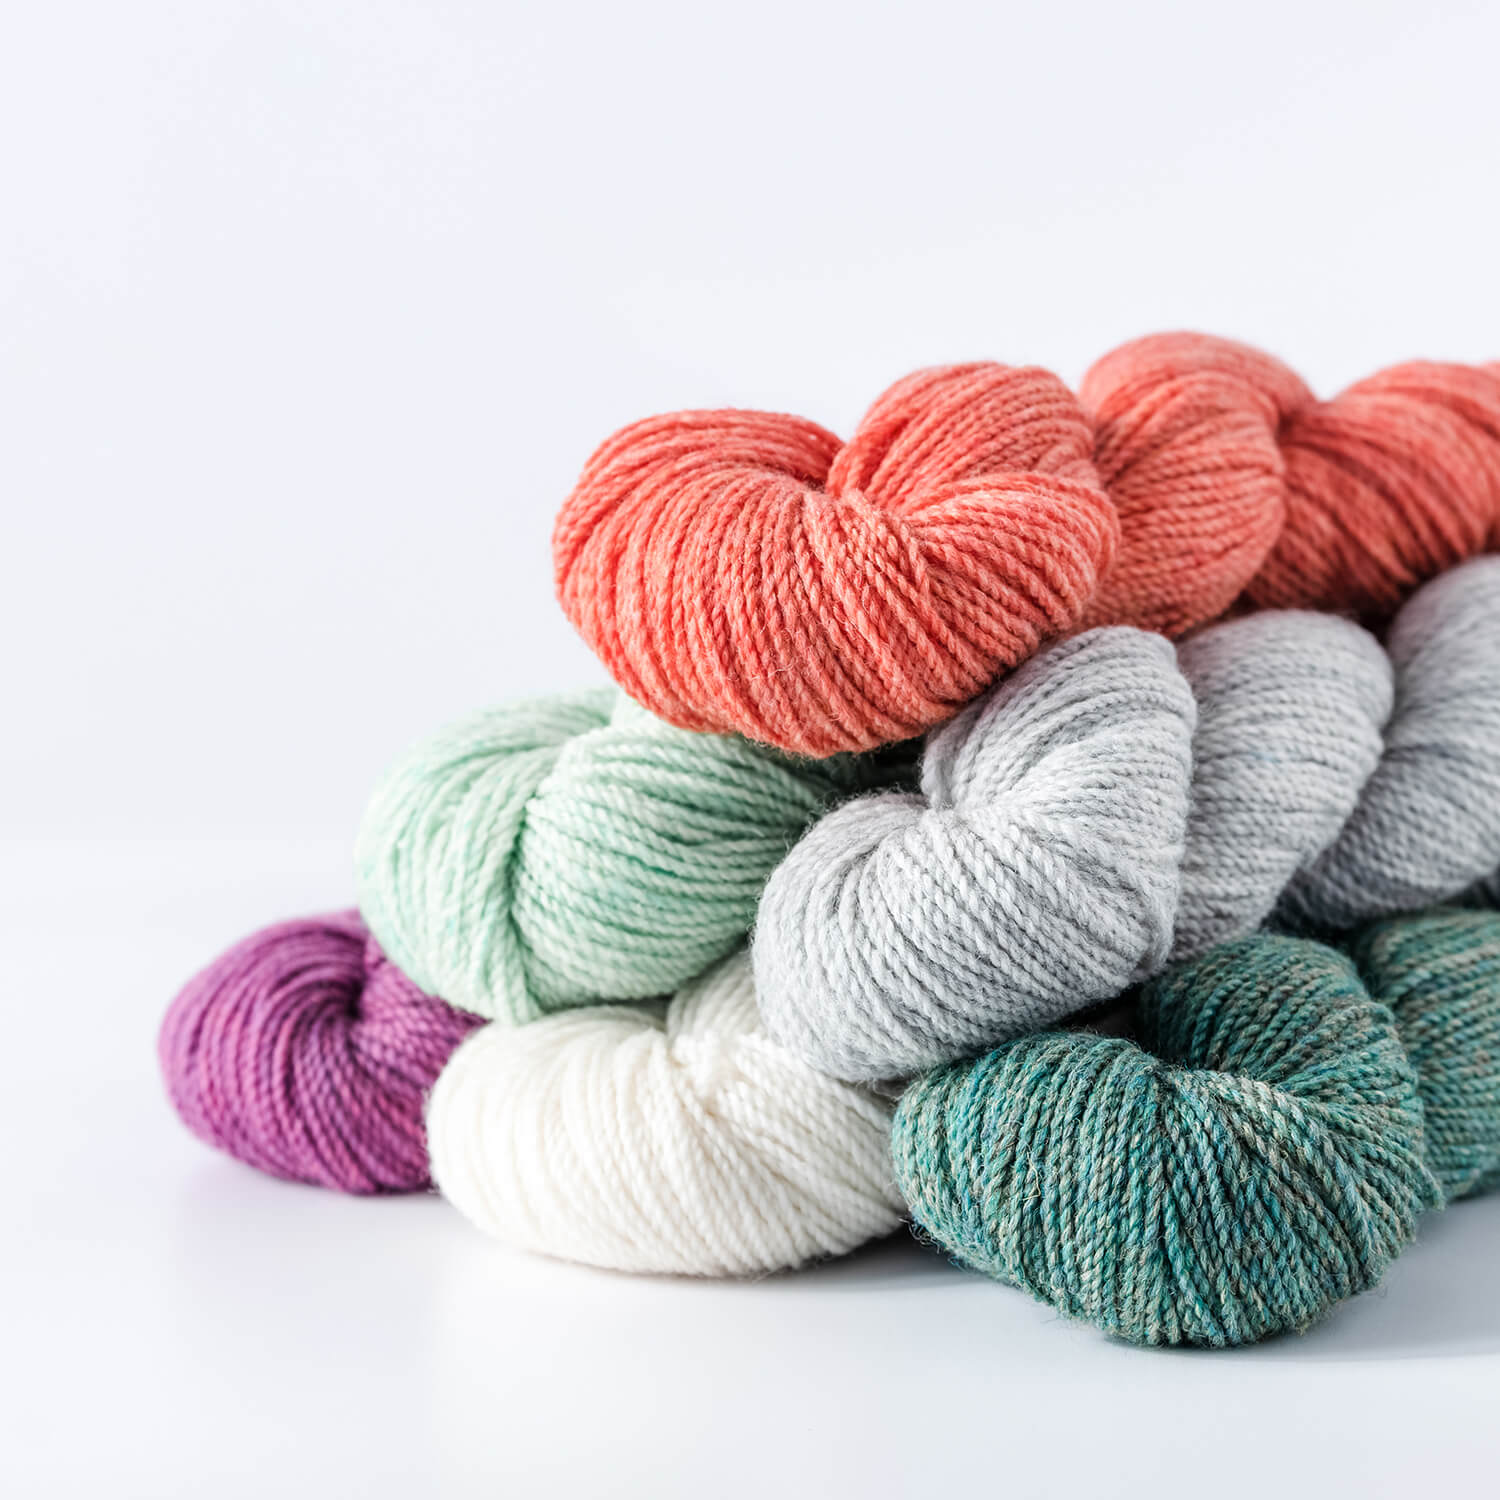 a pile of several hanks of Camper yarn in a variety of colors